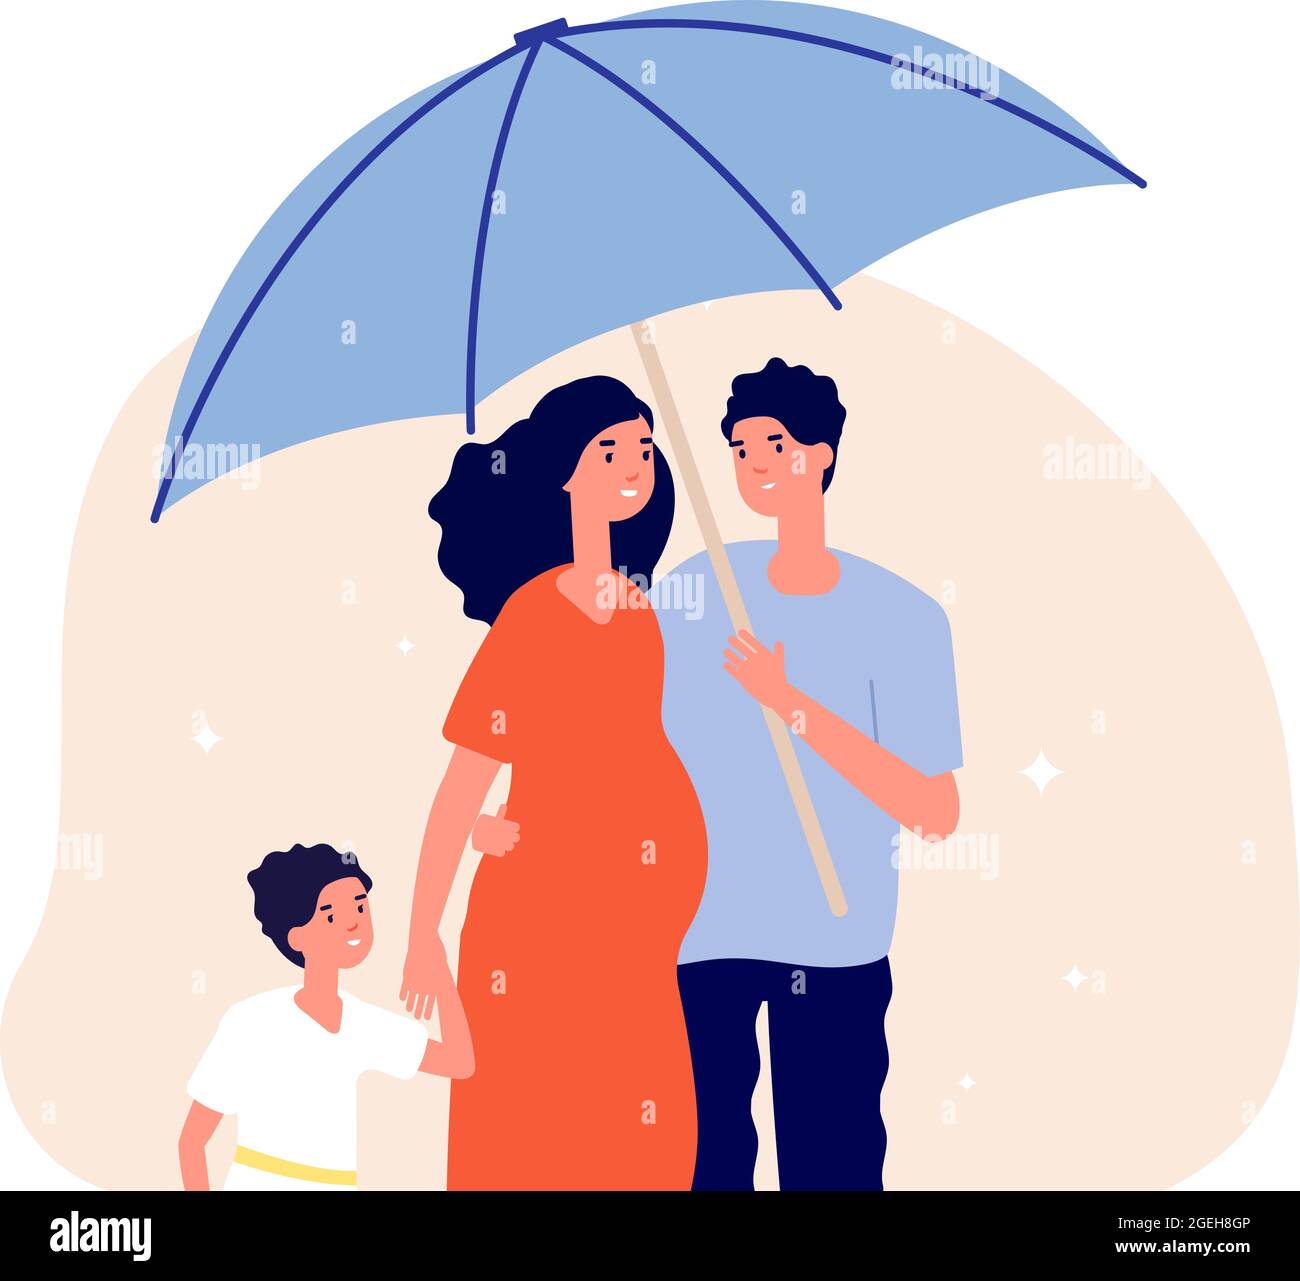 Family protection concept. Man holding umbrella under pregnant wife and son. Happy parents, adults and child. Life insurance, social protect metaphor Stock Vector